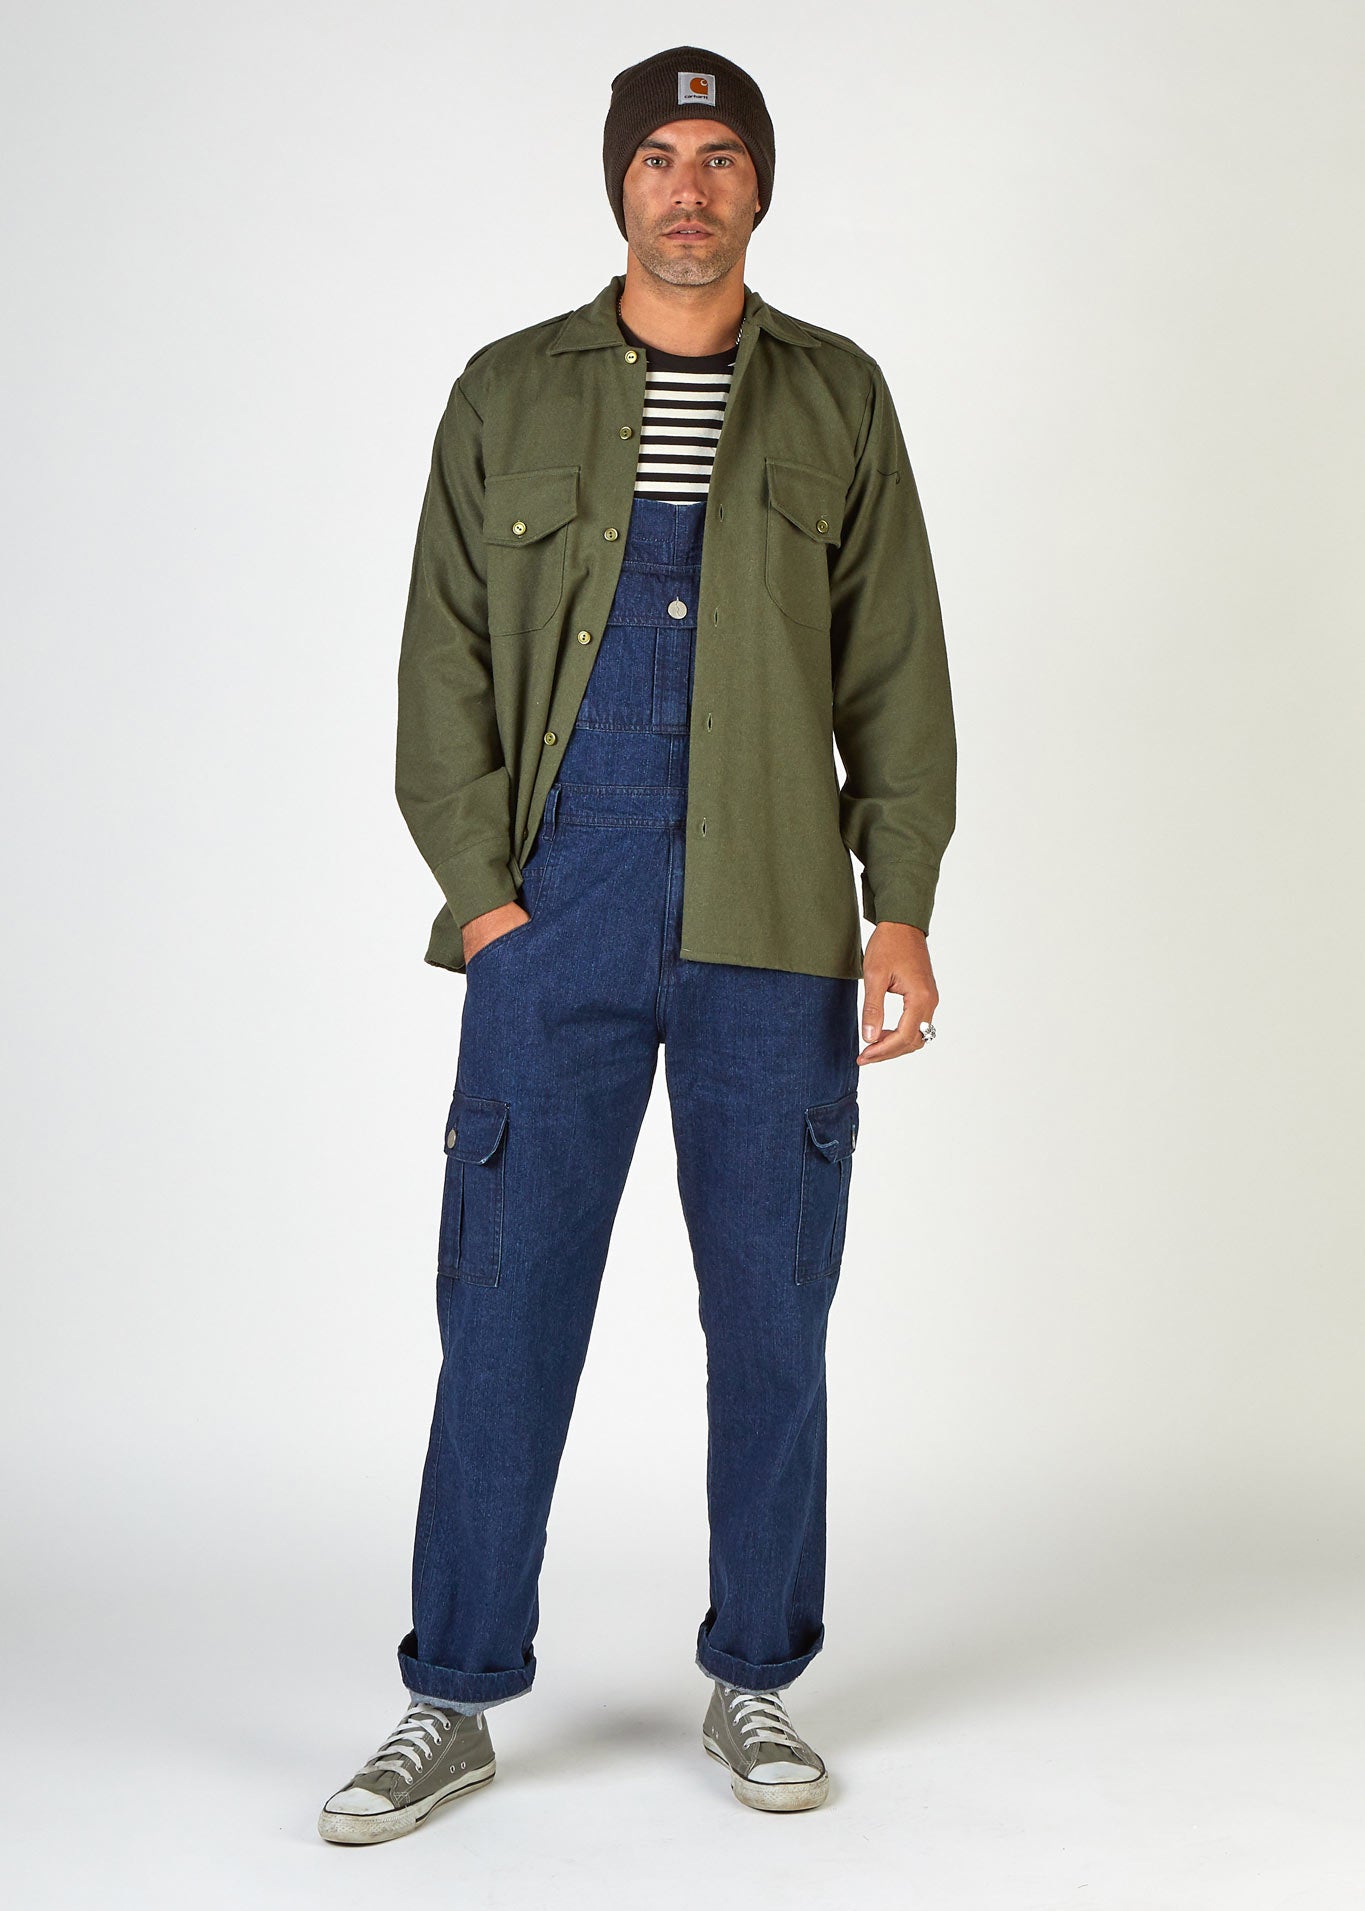 Front view of 90's-style 'Lee' bib-overall paired with green army-style shirt.